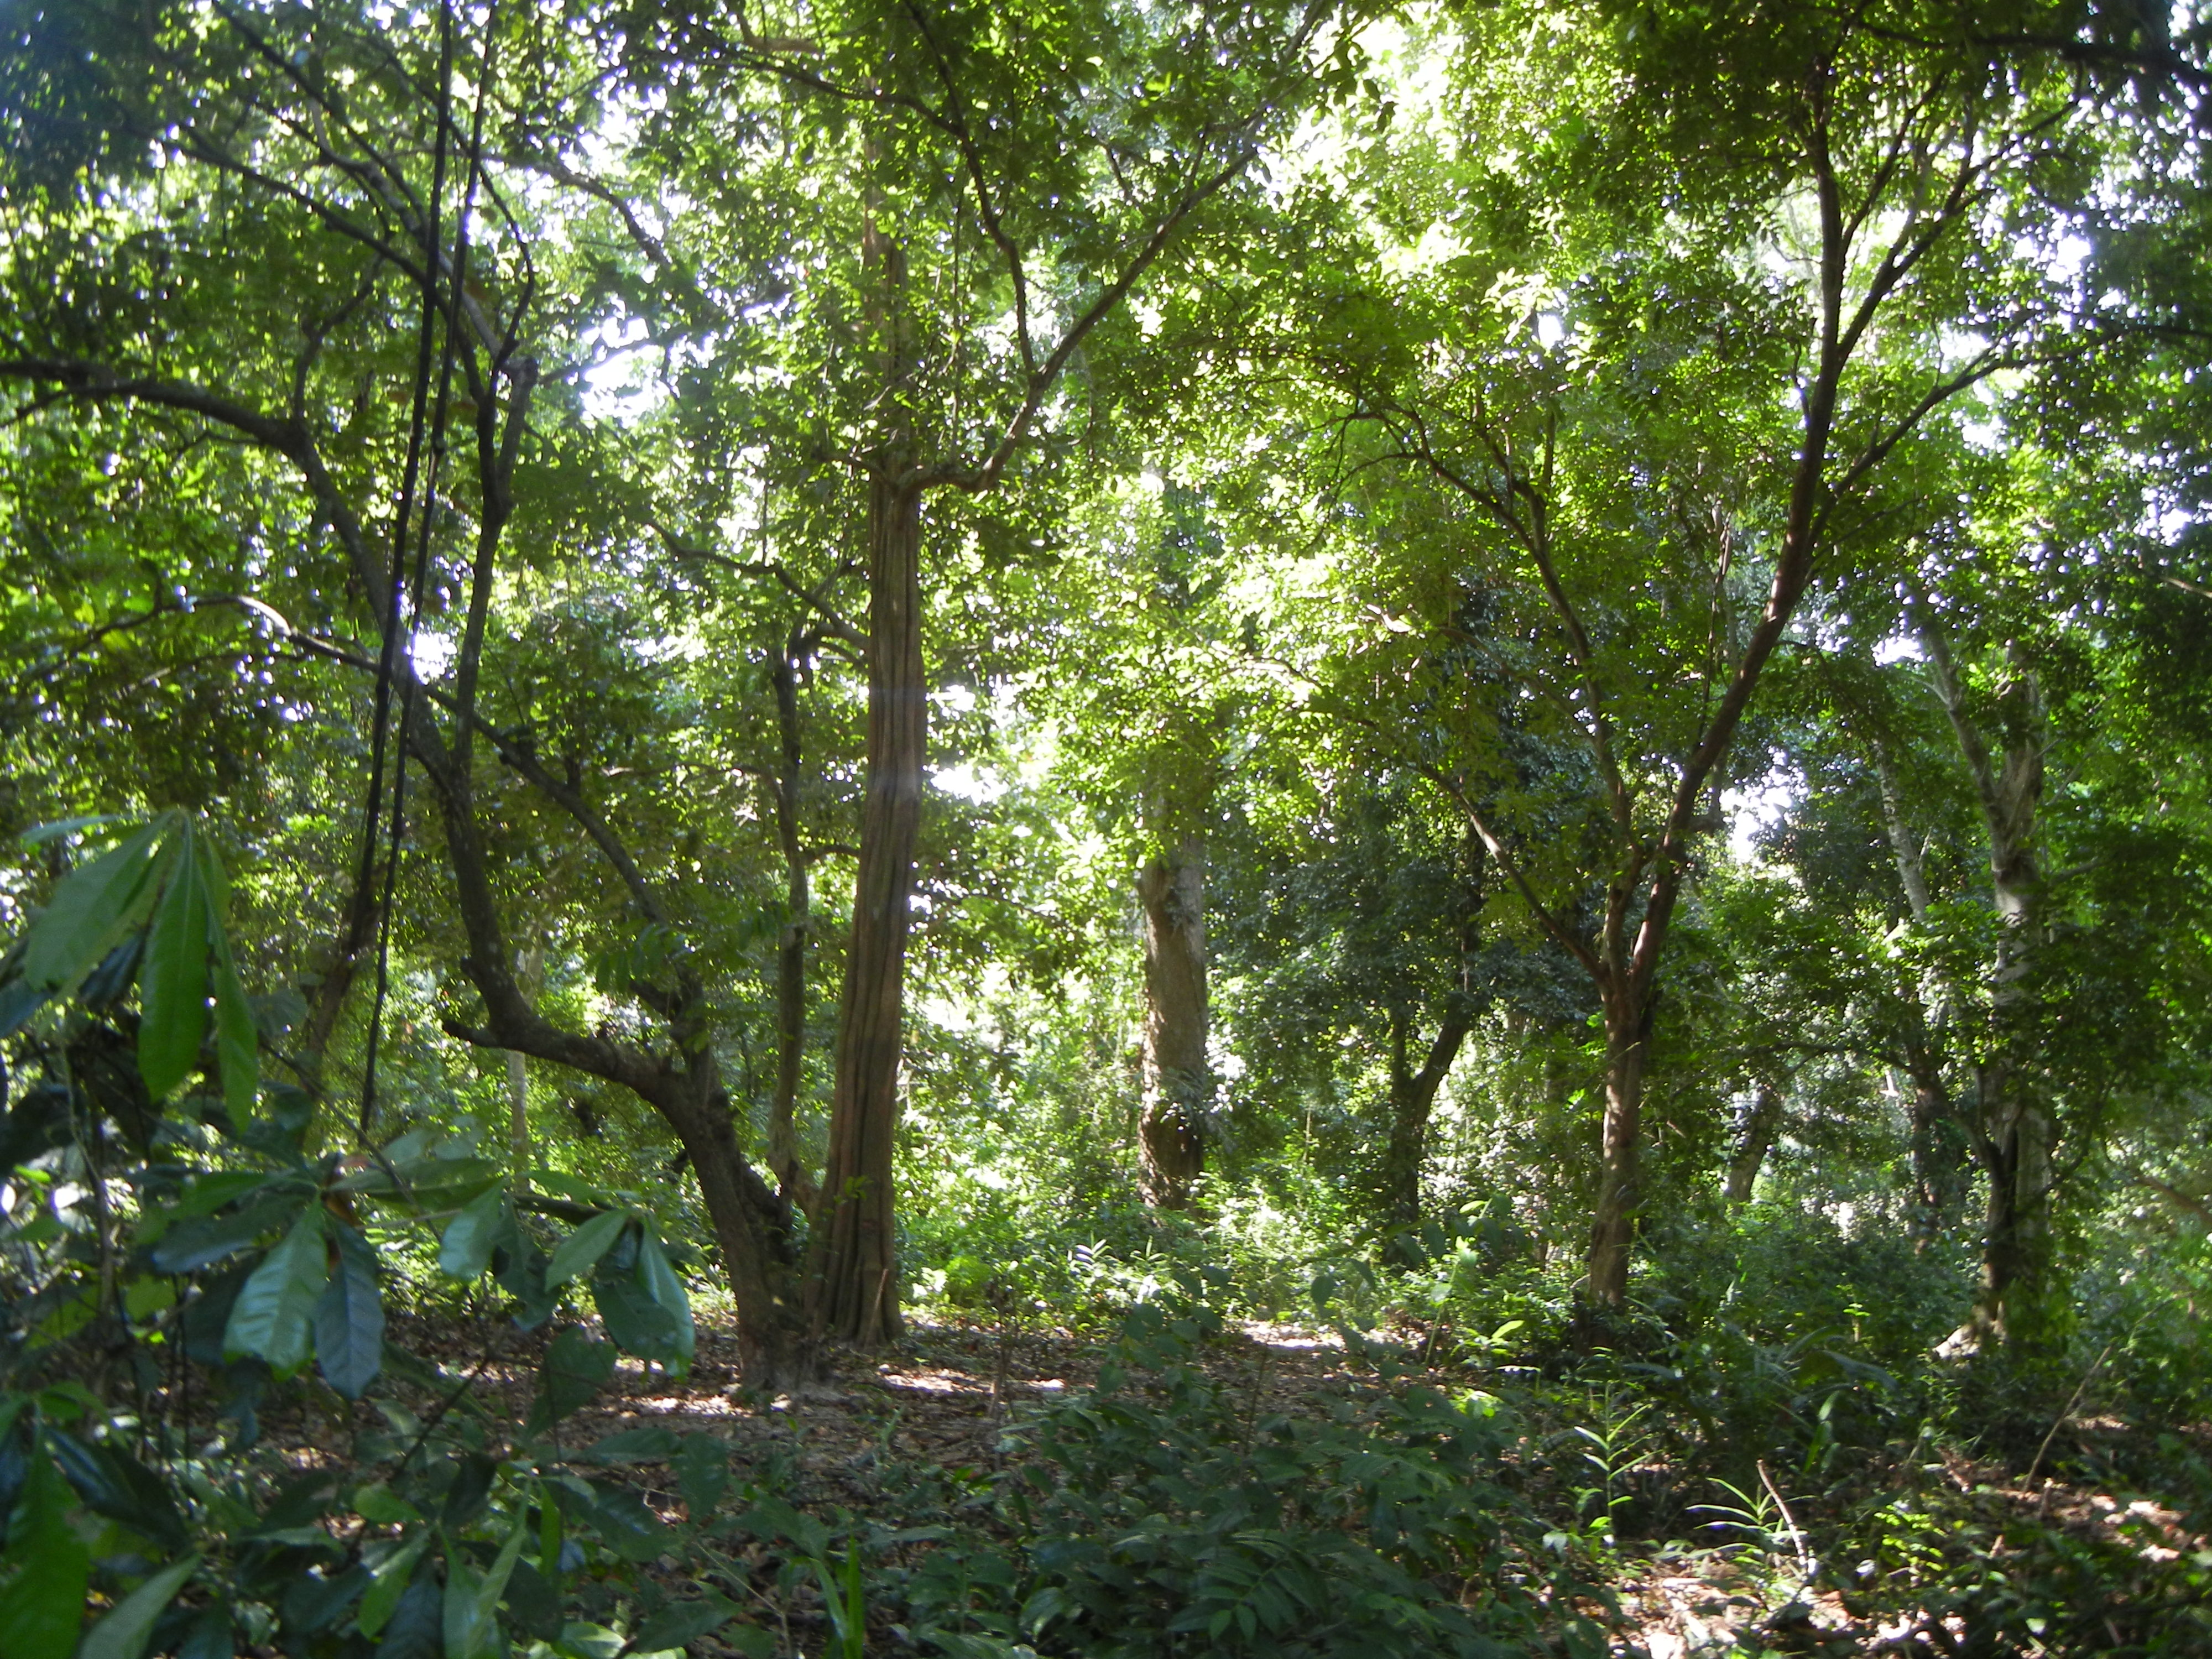 A thick grove of green trees